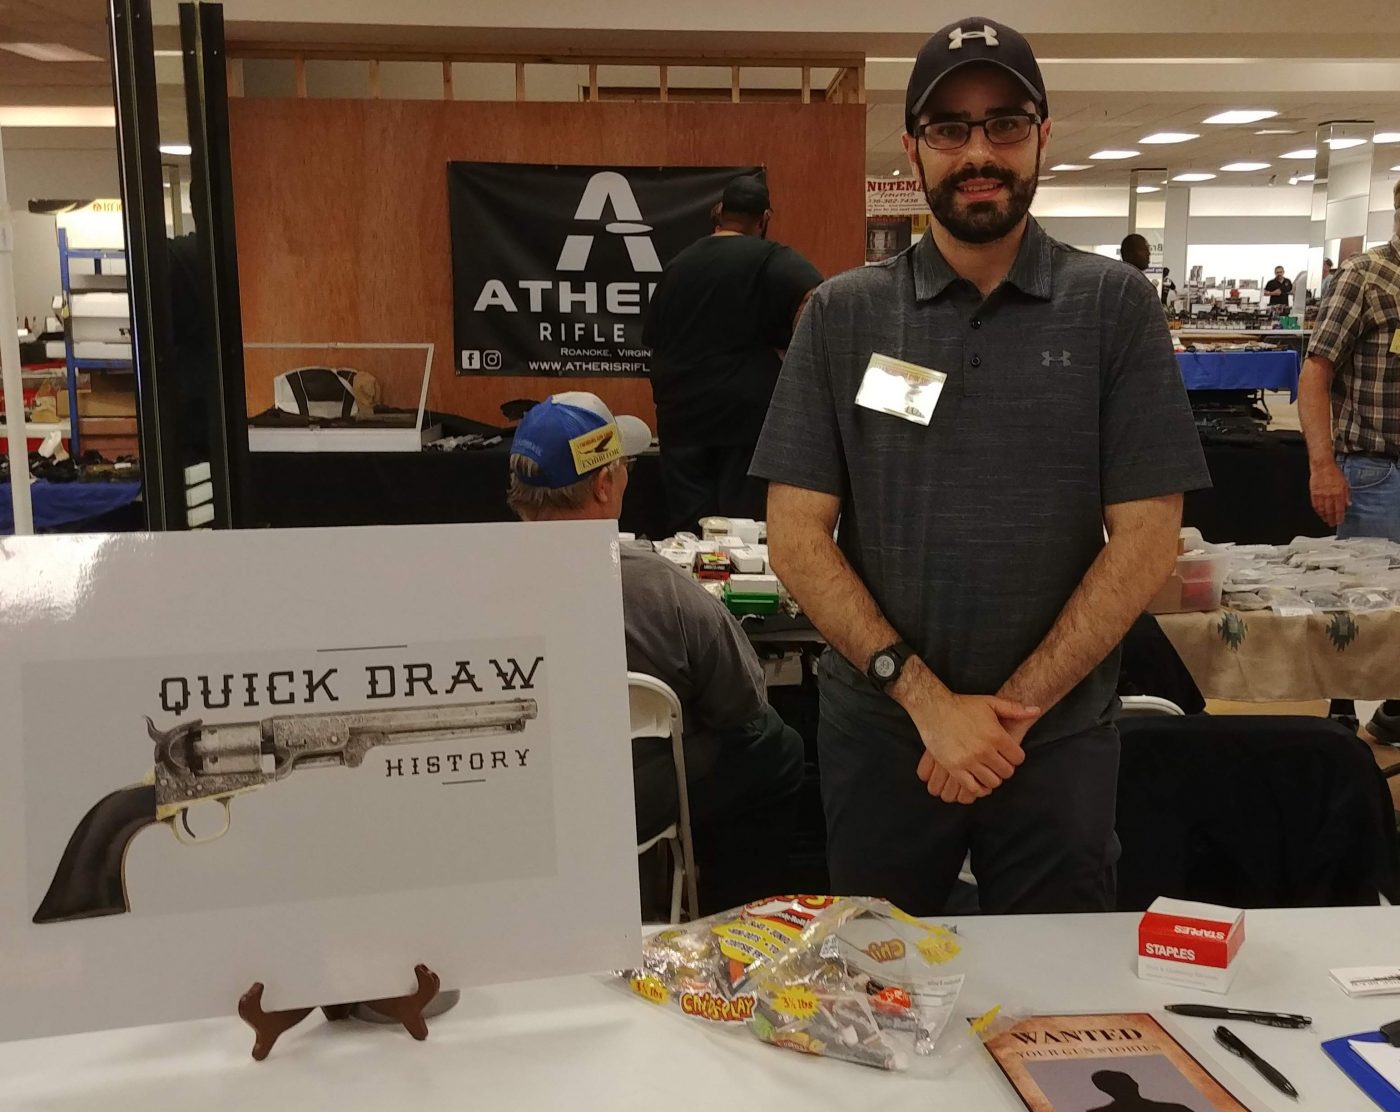 Noah at his booth during a gun show in southern Virginia.